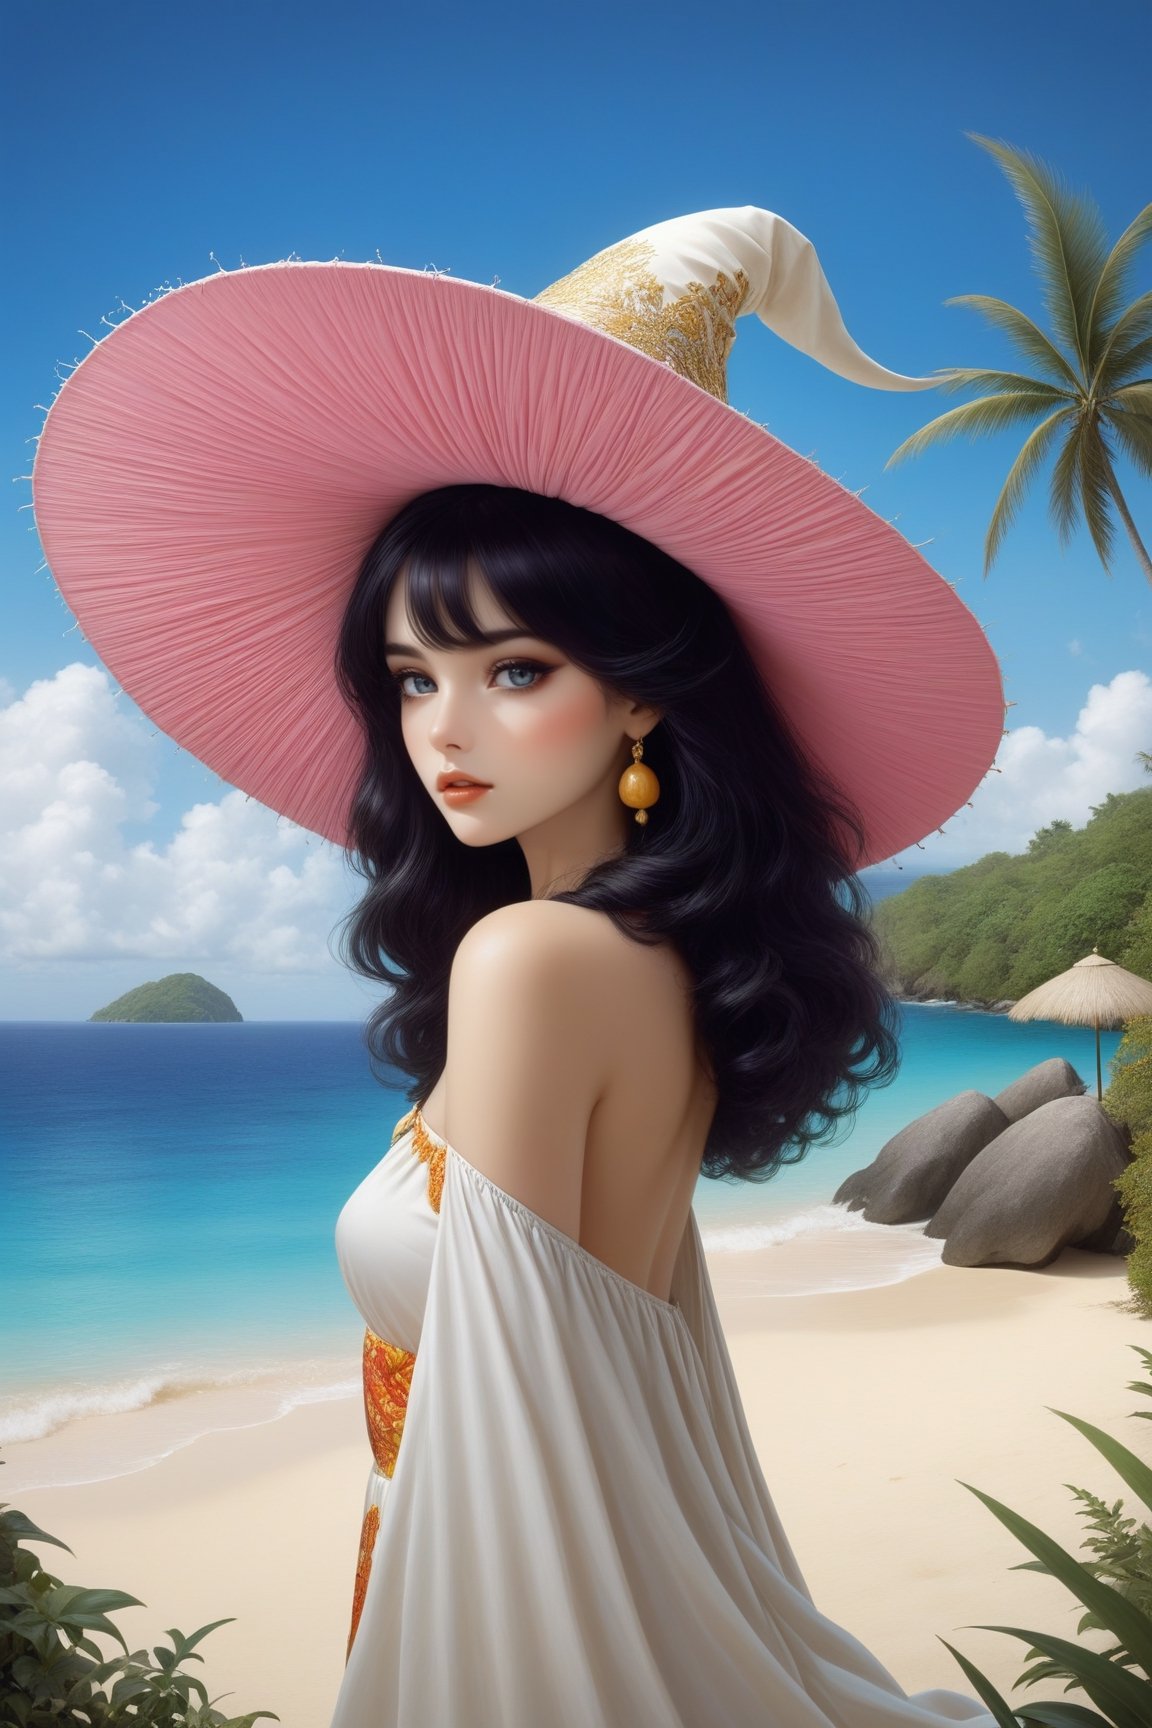 ((Ultra-Detailed)) Photography of a sophisticated witch \(sp.ed.ogInky1\) standing in the tropical island beach,1girl,wearing sm1c-witchhat,detailed exquisite face,detailed eyes,detailed soft shiny skin,glossy lips,playful smirks,detailed blonde hair,detailed coral-blue hat,pink and white dress,jewelry,small earrings
BREAK
[backdrop;highly detailed magnificent view of tropical island beach,palm trees,vibrant colors],(head to thigh shot)
BREAK
rule of thirds,studio photo,perfect composition,(masterpiece,HDR,trending on artstation,8K,Hyper-detailed,intricate details,hyper realistic,high contrast,Kodachrome 800:1.3),chiaroscuro lighting,soft rim lighting,key light reflecting in the eyes,by Karol Bak,Antonio Lopez,Gustav Klimt and Hayao Miyazaki,art_booster,real_booster,photo_b00ster, Decora_SWstyle,a1sw-InkyCapWitch,ani_booster,more detail XL